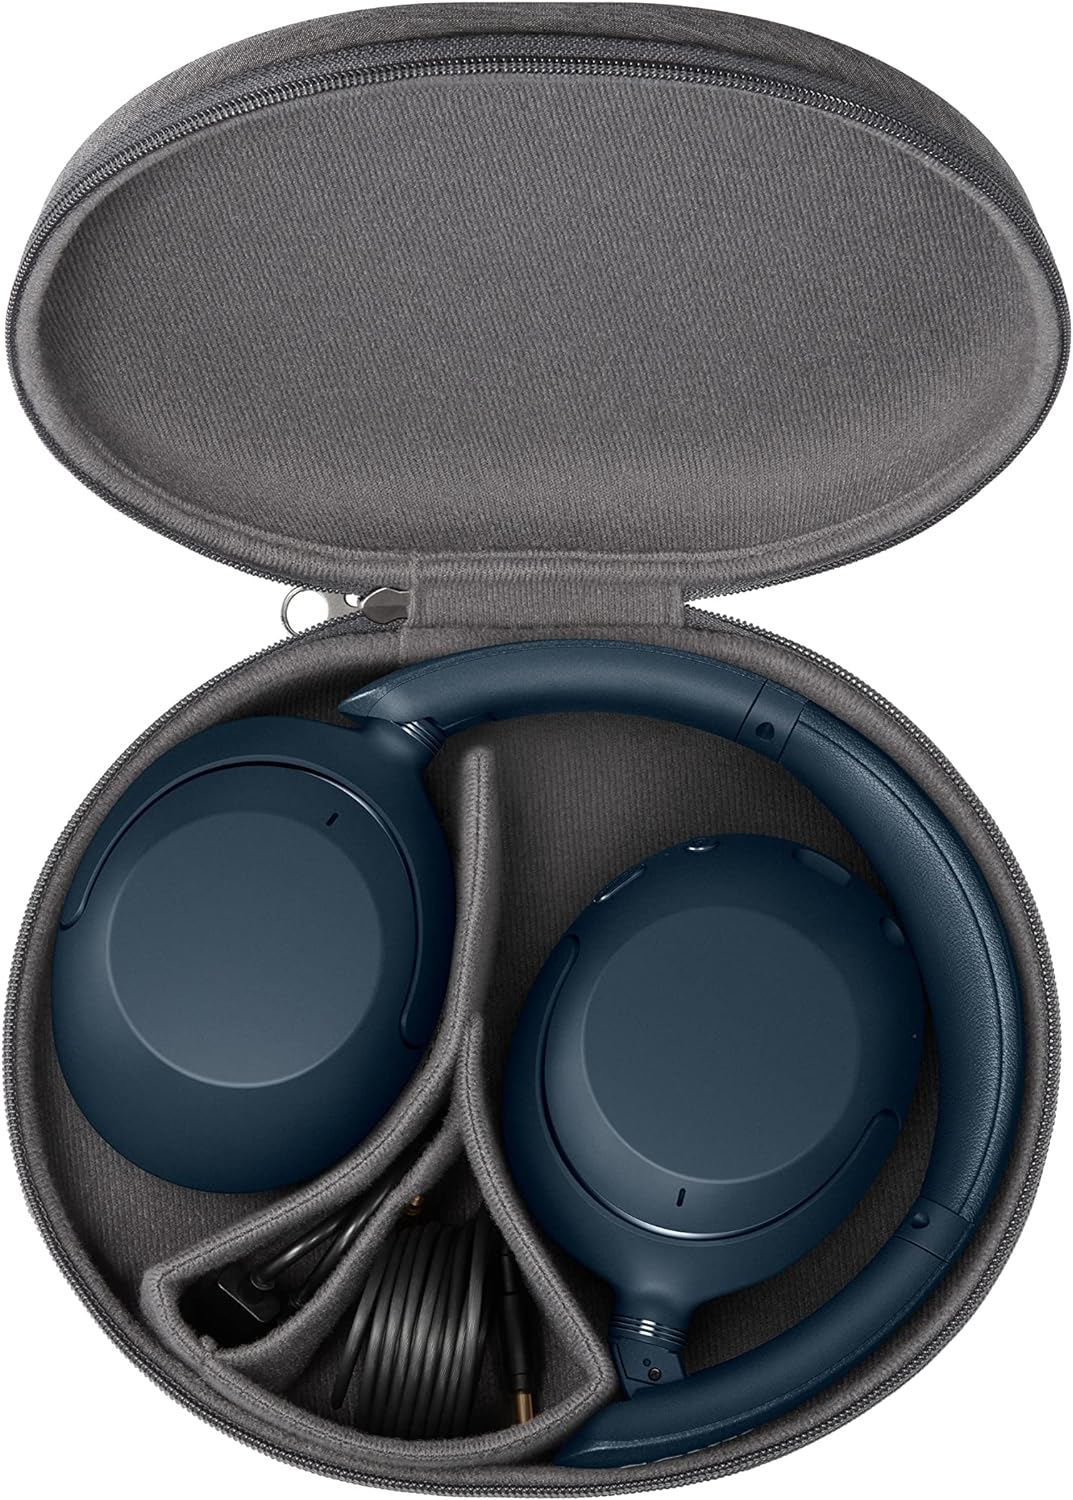 Sony WH-XB910N EXTRA BASS Noise Cancelling Headphones, Wireless Bluetooth Over the Ear Headset with Microphone and Alexa Voice Control, Blue